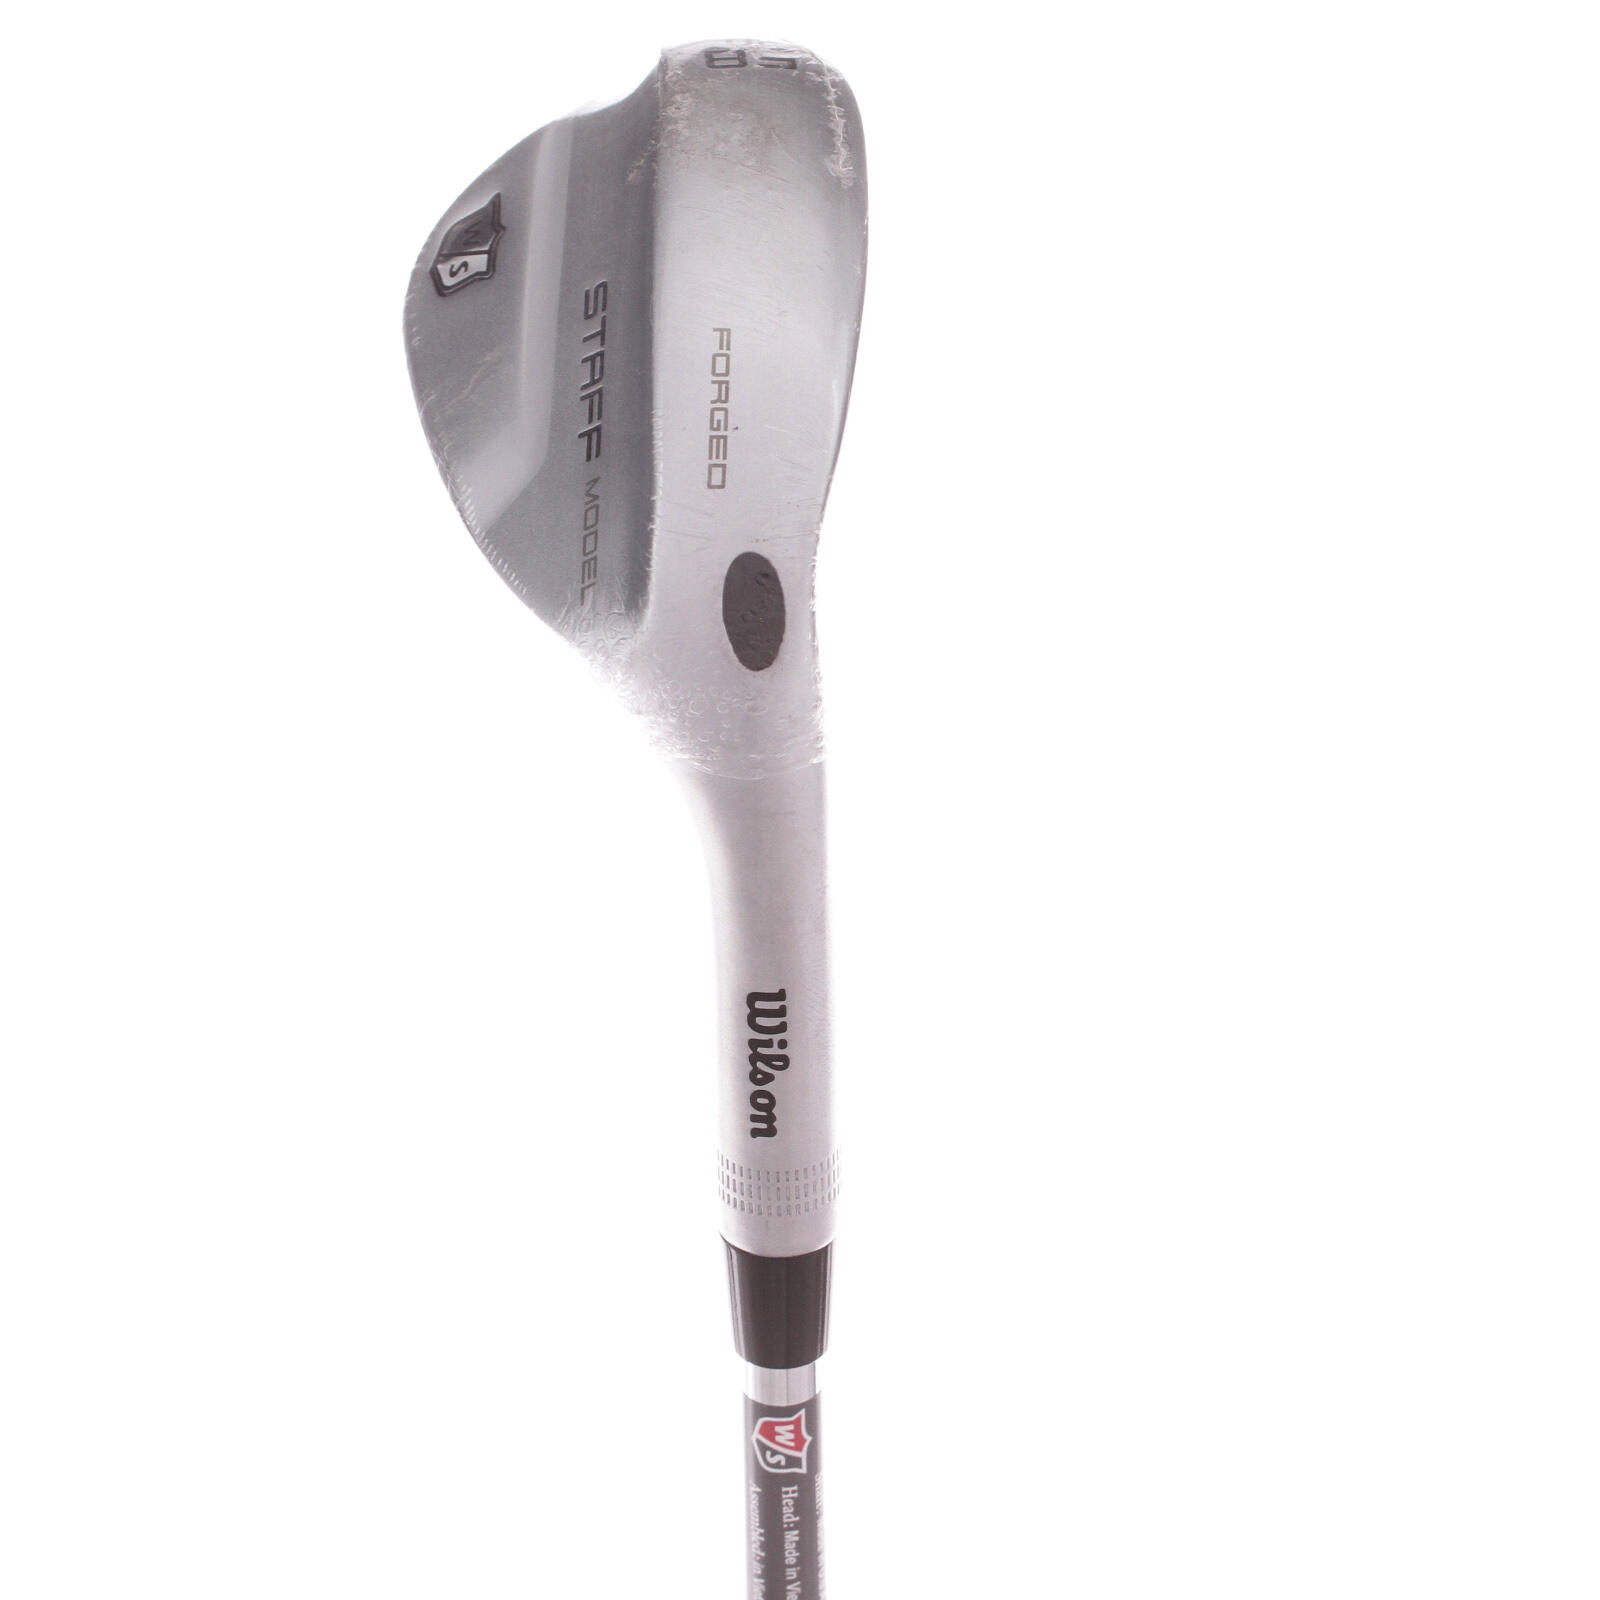 USED - Wedge Wilson Staff Staff Model Brand New 58* Steel Right Handed - GRADE A 3/5